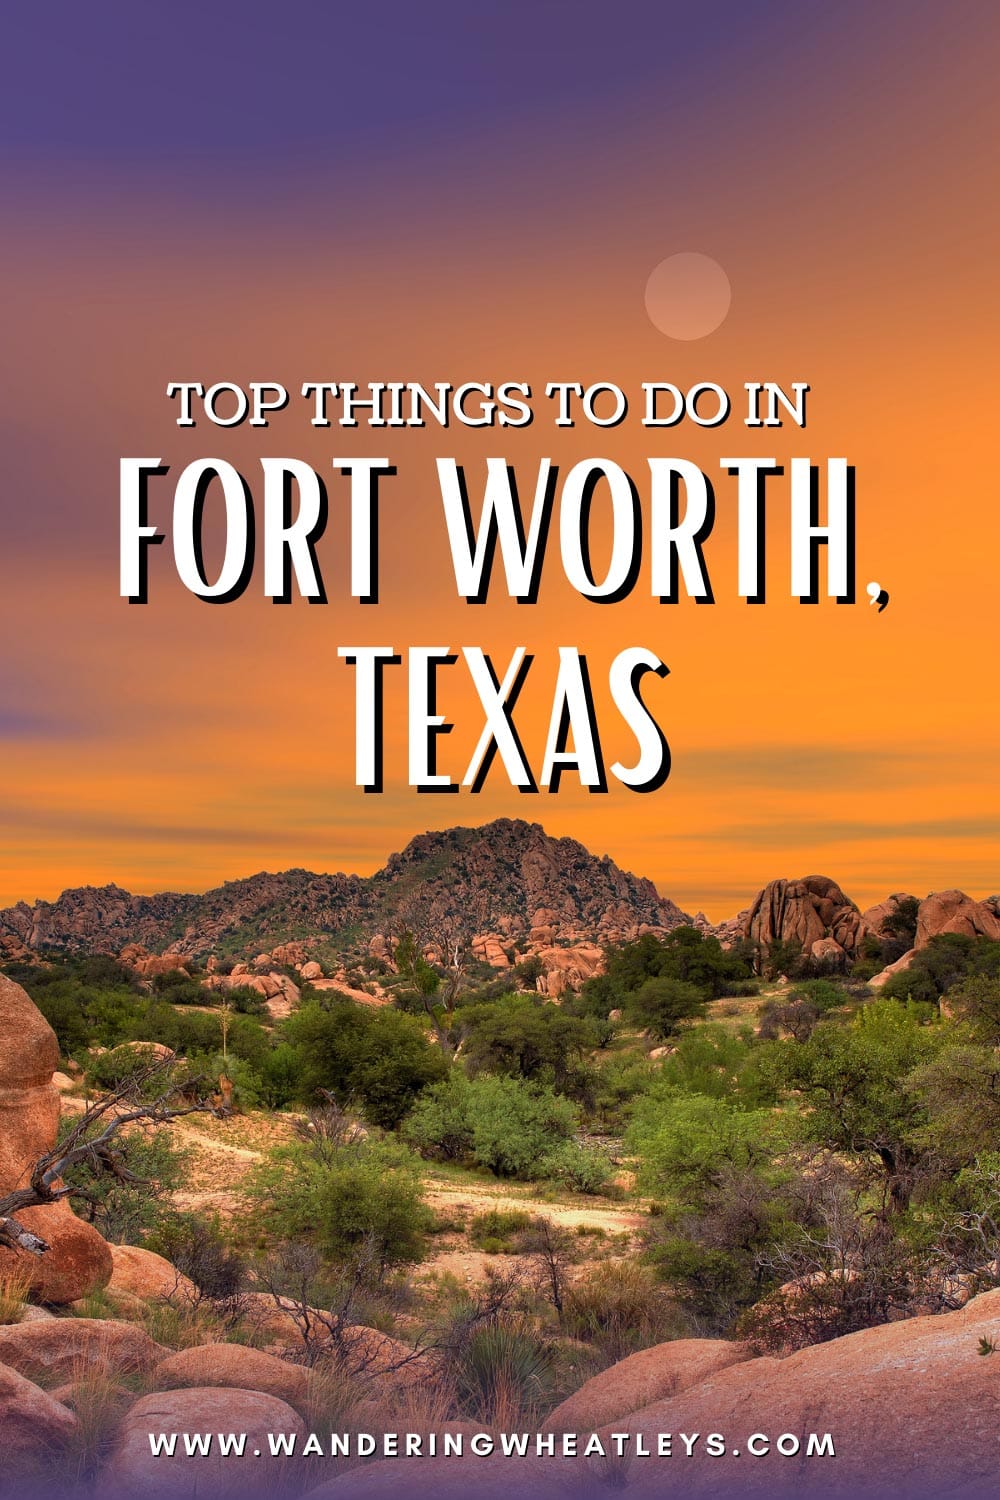 The Best Things to Do in Fort Worth